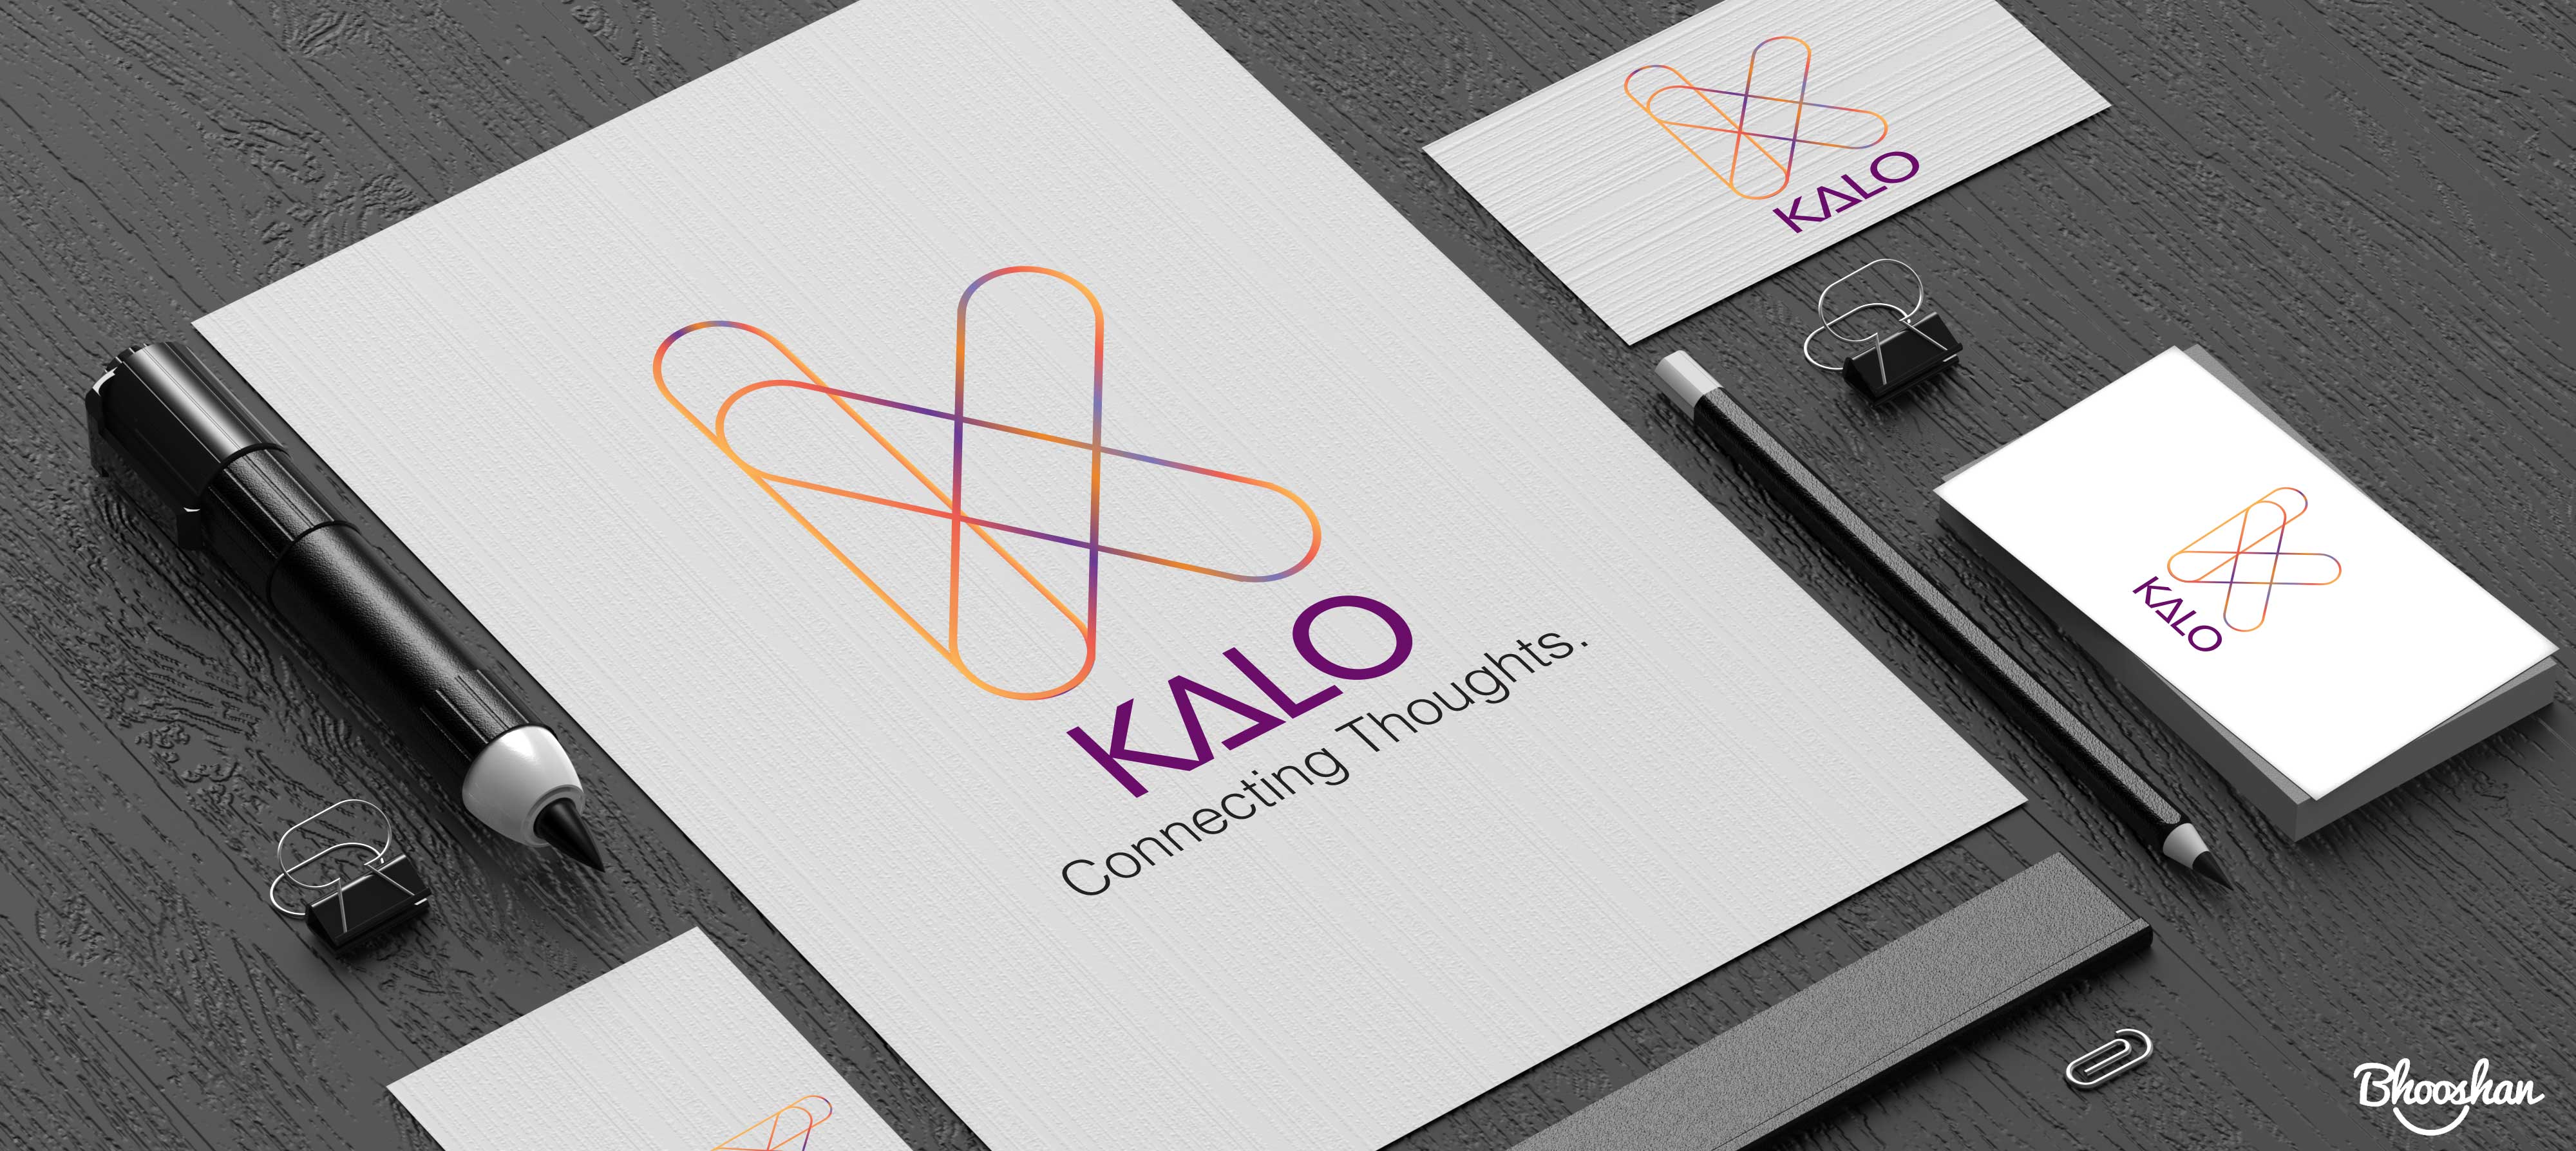 Kalo Healthcare Solutions - Final Identity